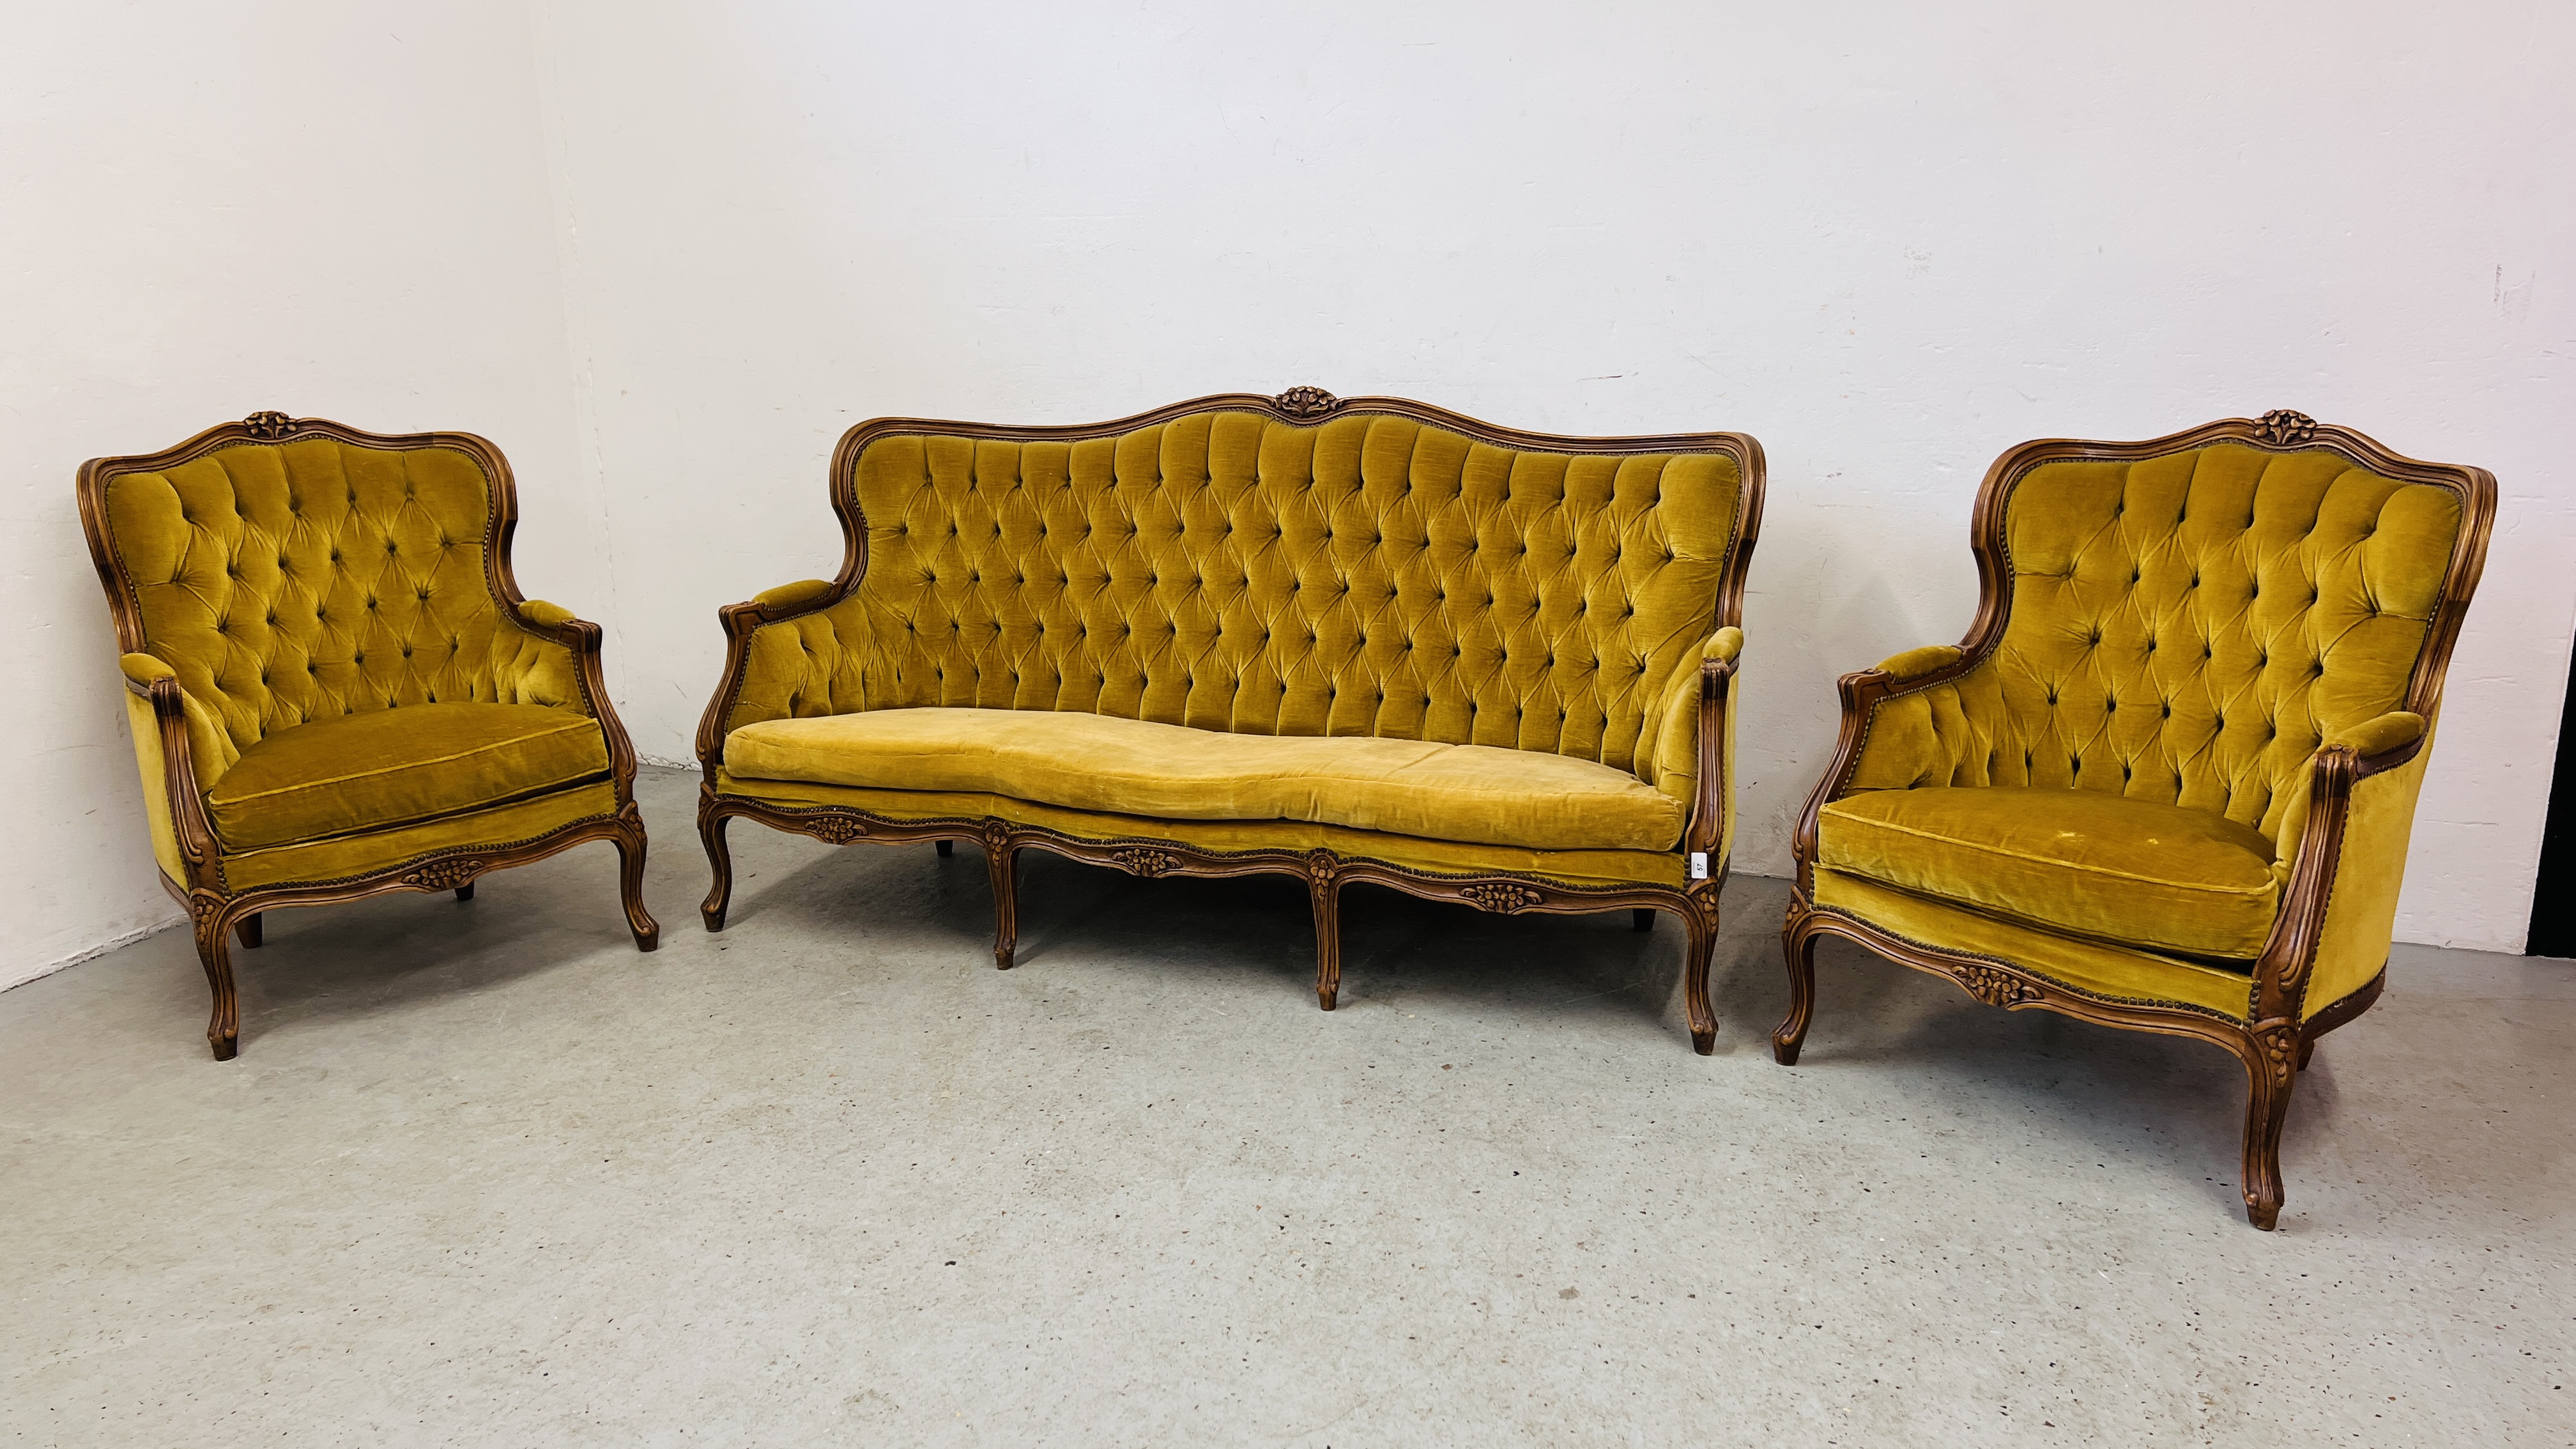 A CONTINENTAL STYLE THREE PIECE LOUNGE SUITE WITH GOLD VELOUR BUTTON BACK UPHOLSTERY (TRADE SALE